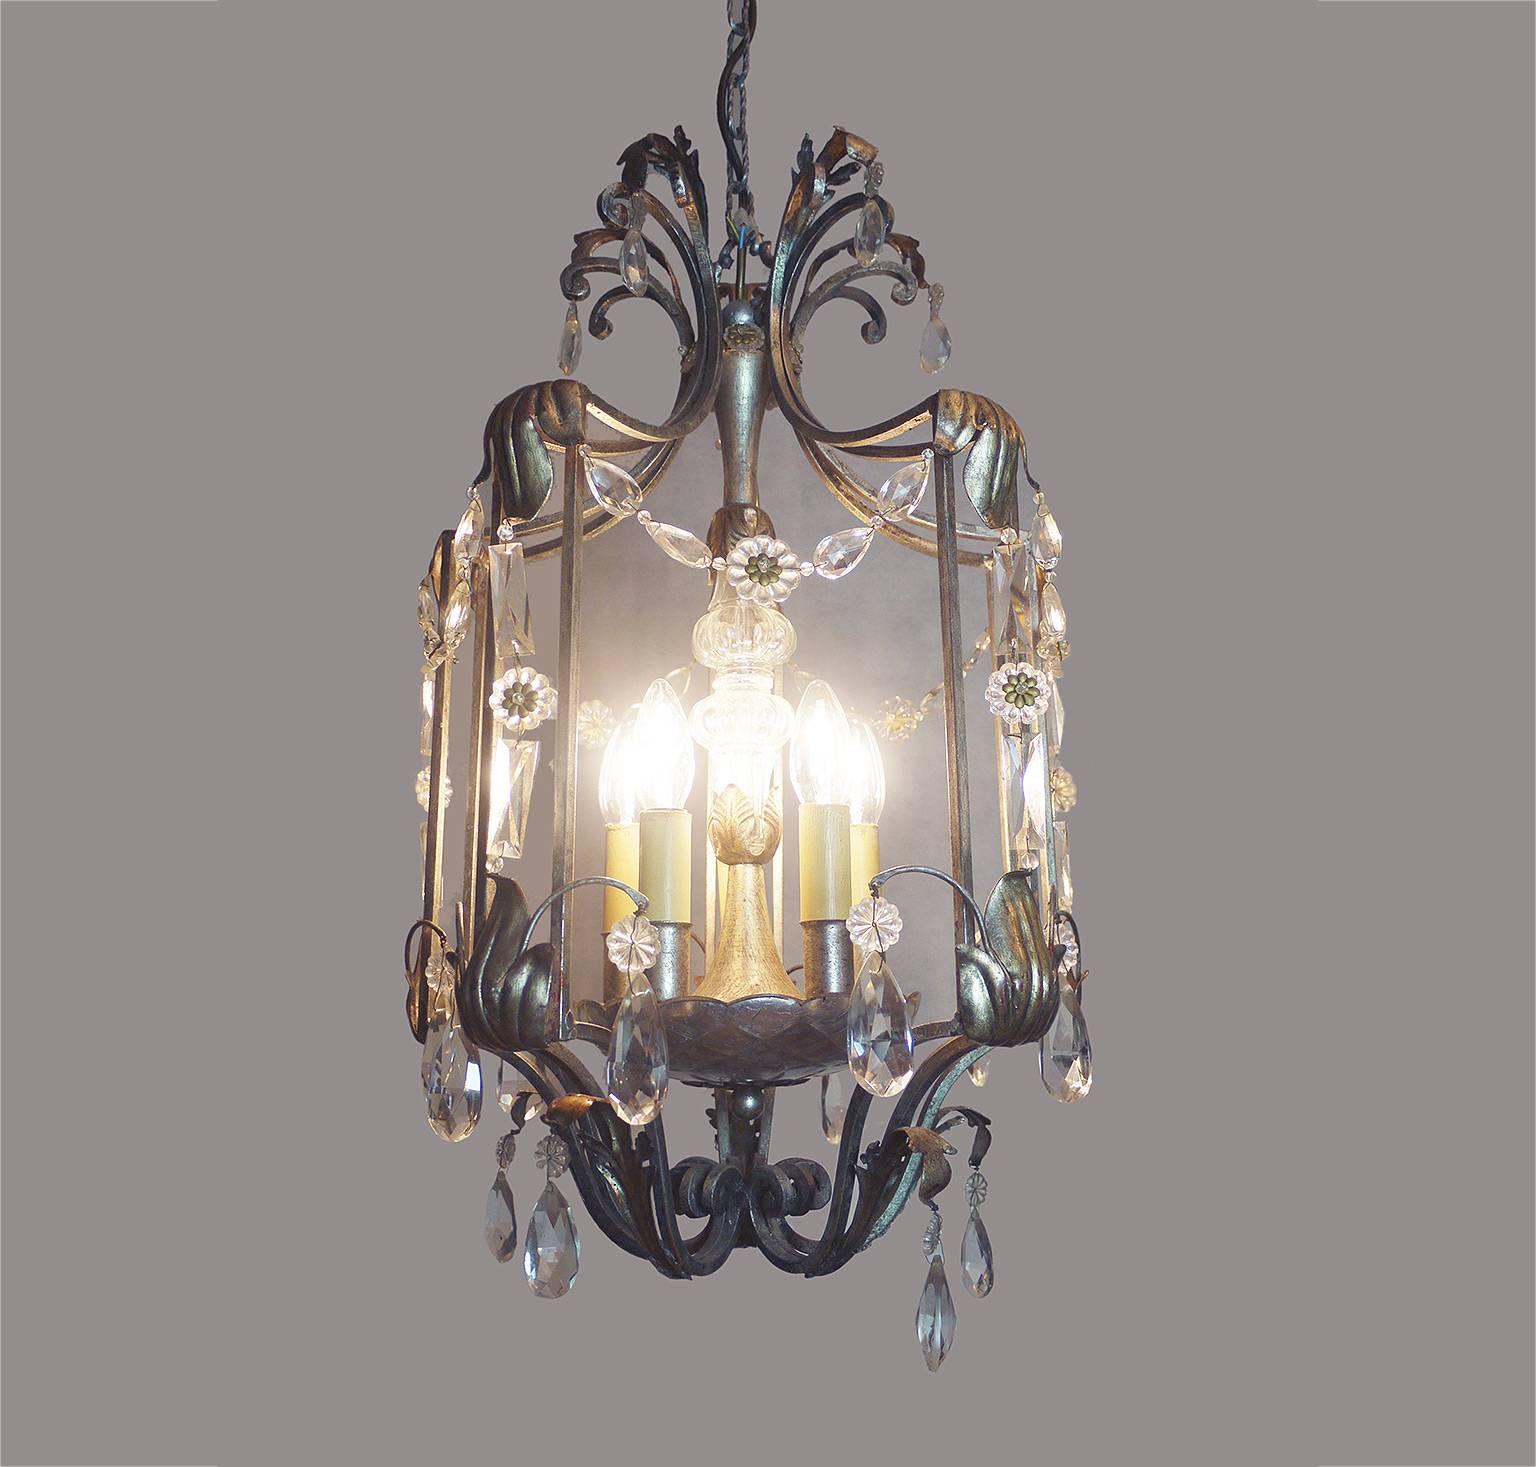 Elegant Florentine crystal and wrought iron leaf chandelier by BF Art, Italy. 

Measures: dm 15.75“ (40 cm), height 26“ (66 cm), height incl. chain and canopy 59“ (150 cm). 
Lighting: takes five small Edison E14 base screw bulbs. 
Condition: very